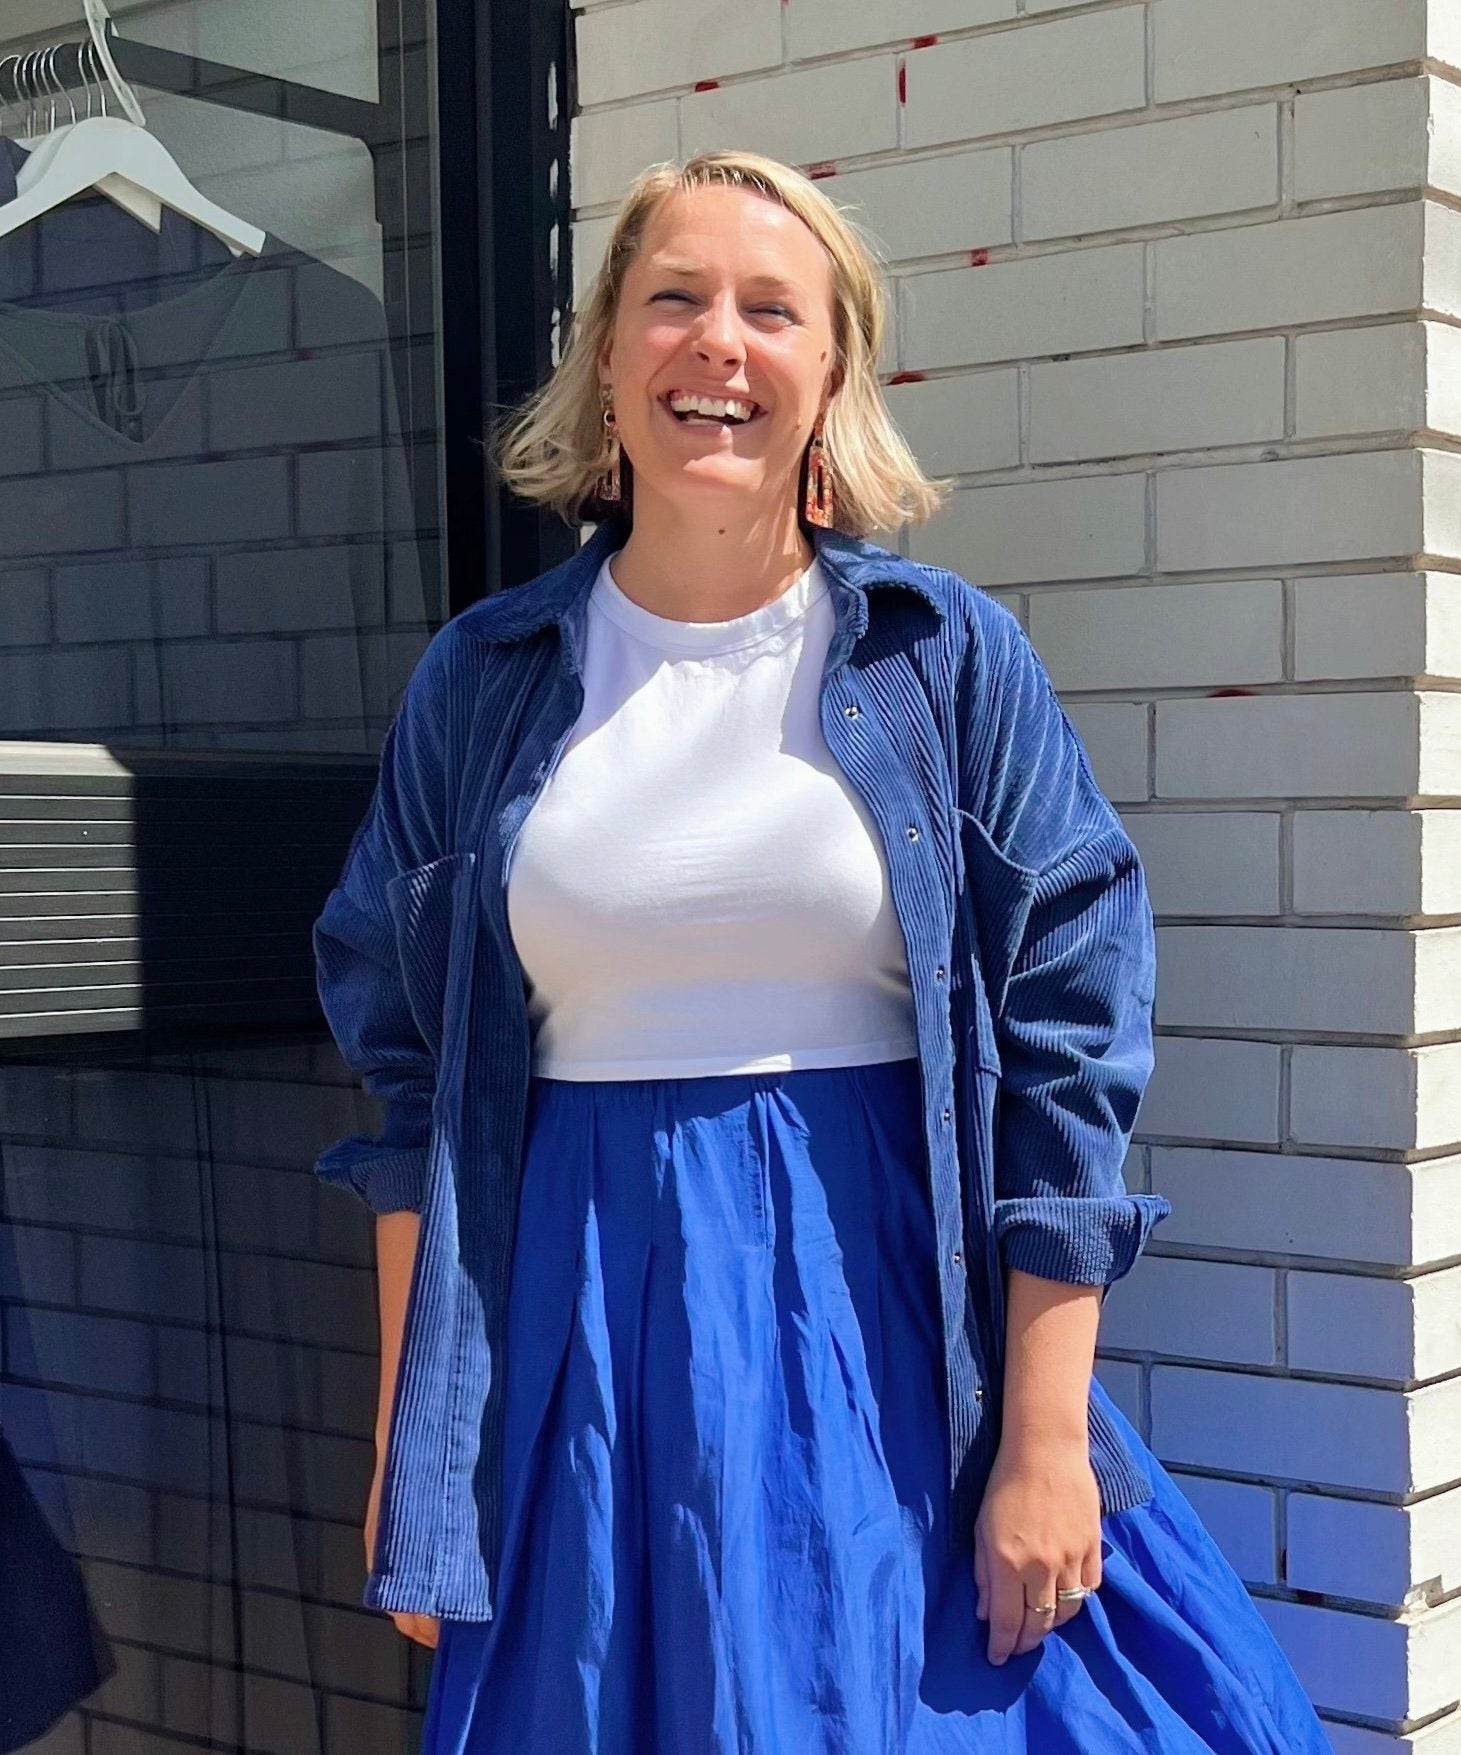 Sara standing against the sunlight in front of MM Brunswick’s white brick storefront. She has golden shoulder-length hair and smiles at the camera. She is wearing a white top, blue corduroy button-down shirt, and blue skirt.